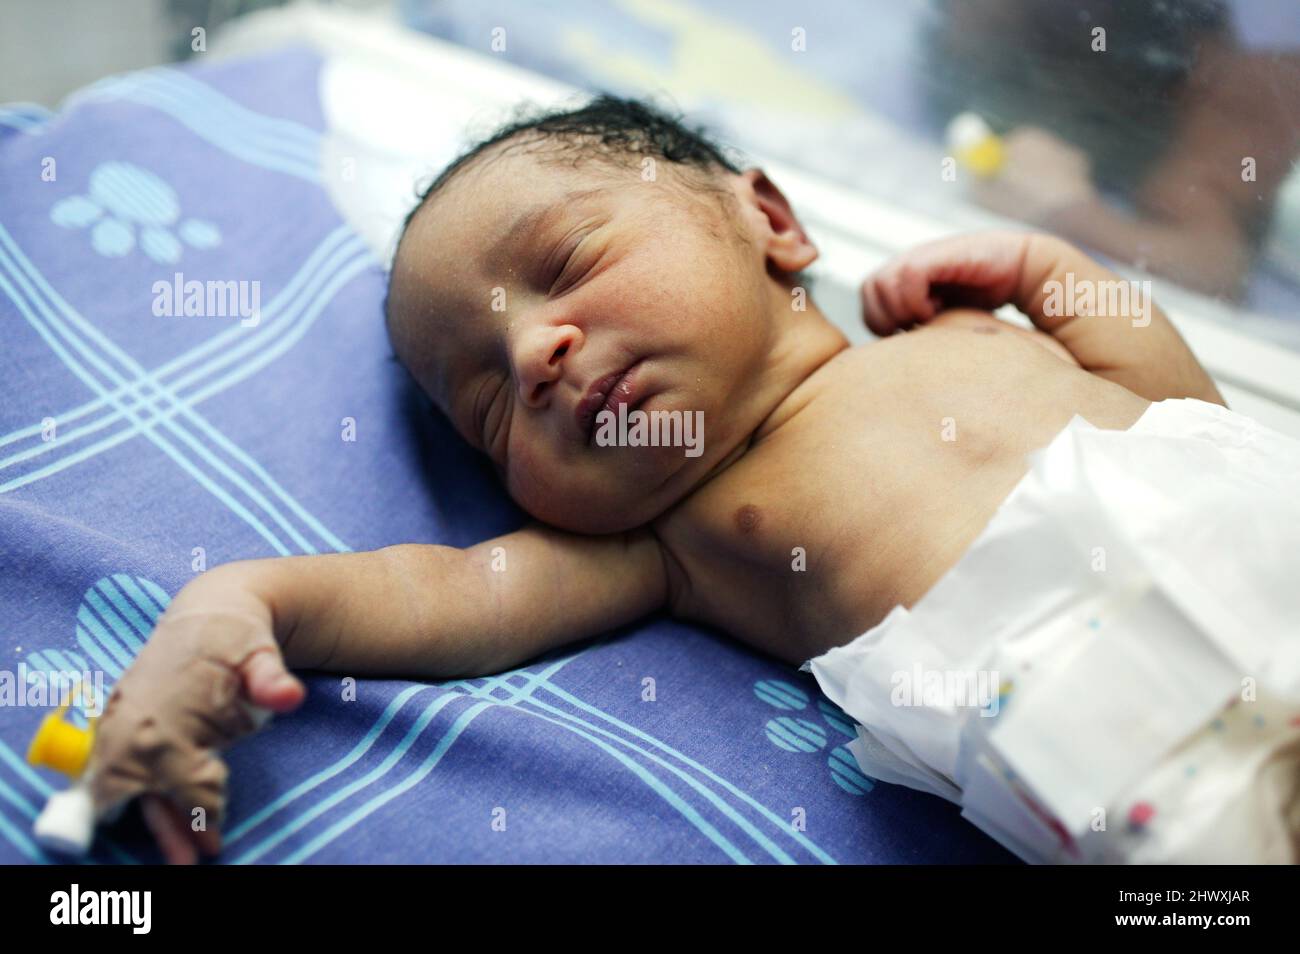 Close-up of a premature baby boy. Stock Photo